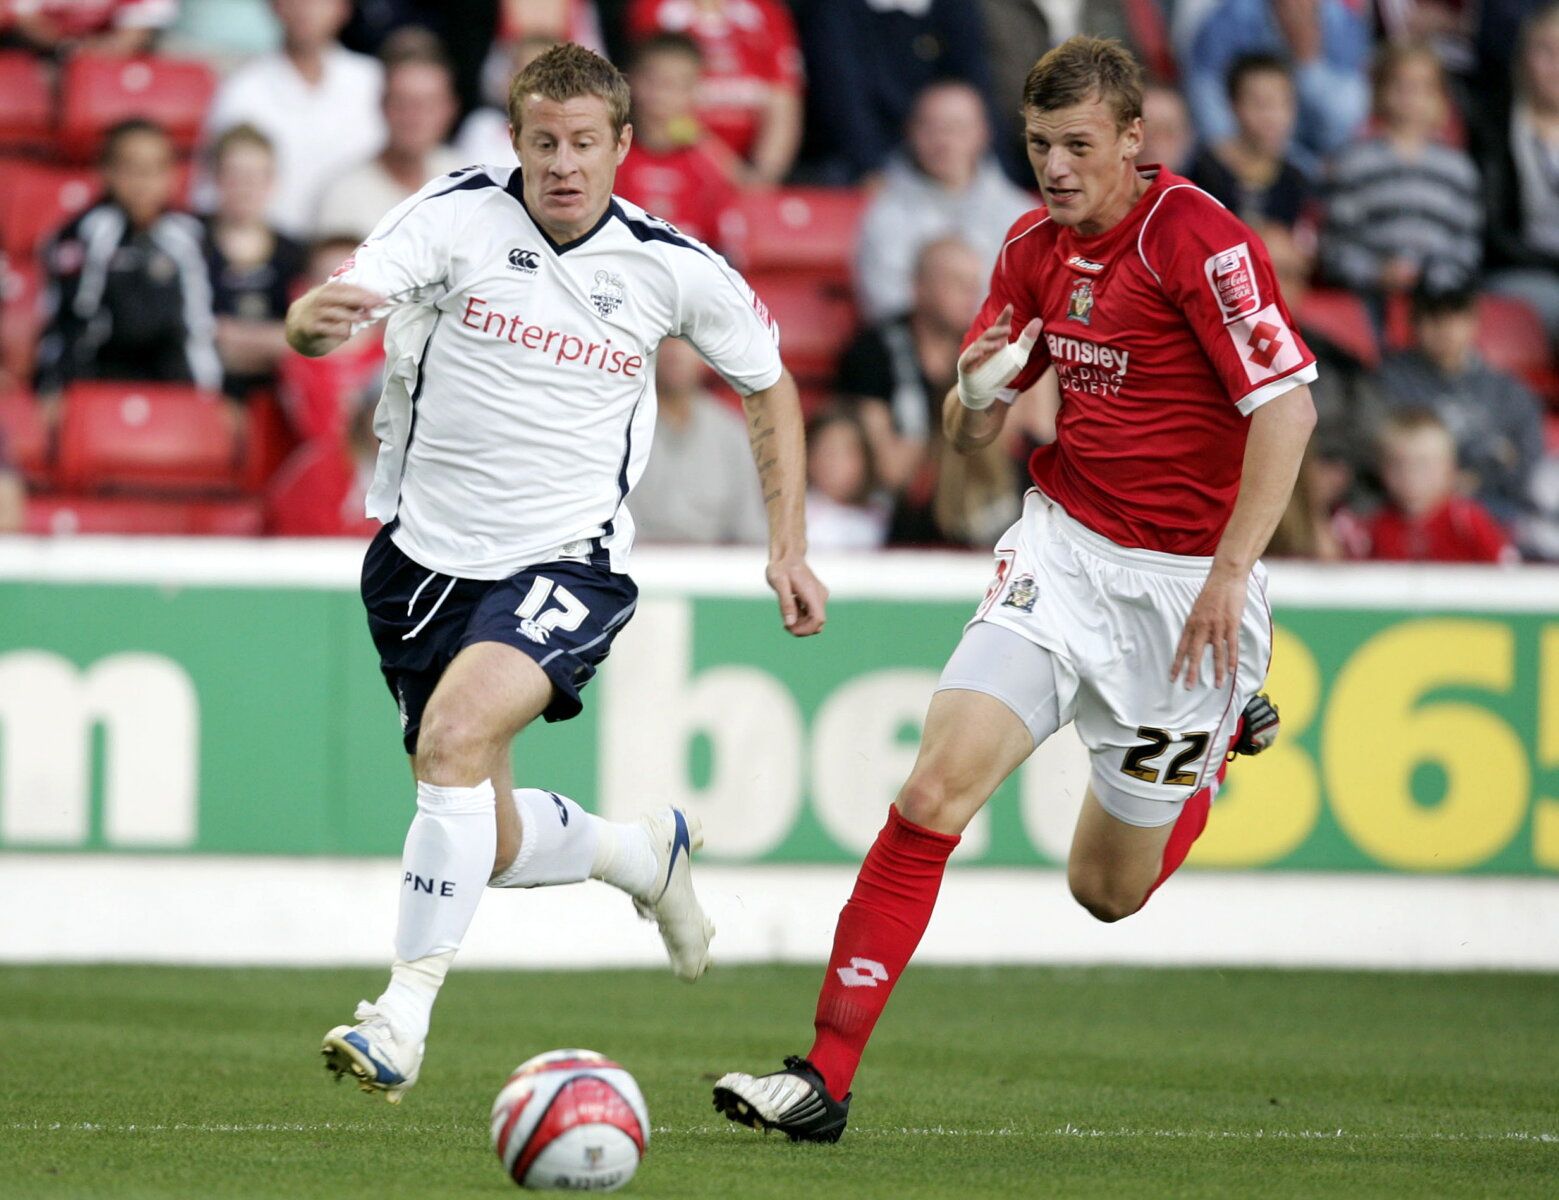 Football - Barnsley v Preston North End Coca-Cola Football League Championship - Oakwell - 09/10 - 18/8/09 
Paul Parry - Preston North End (L) in action against Luke Potter - Barnsley 
Mandatory Credit: Action Images / Alex Morton